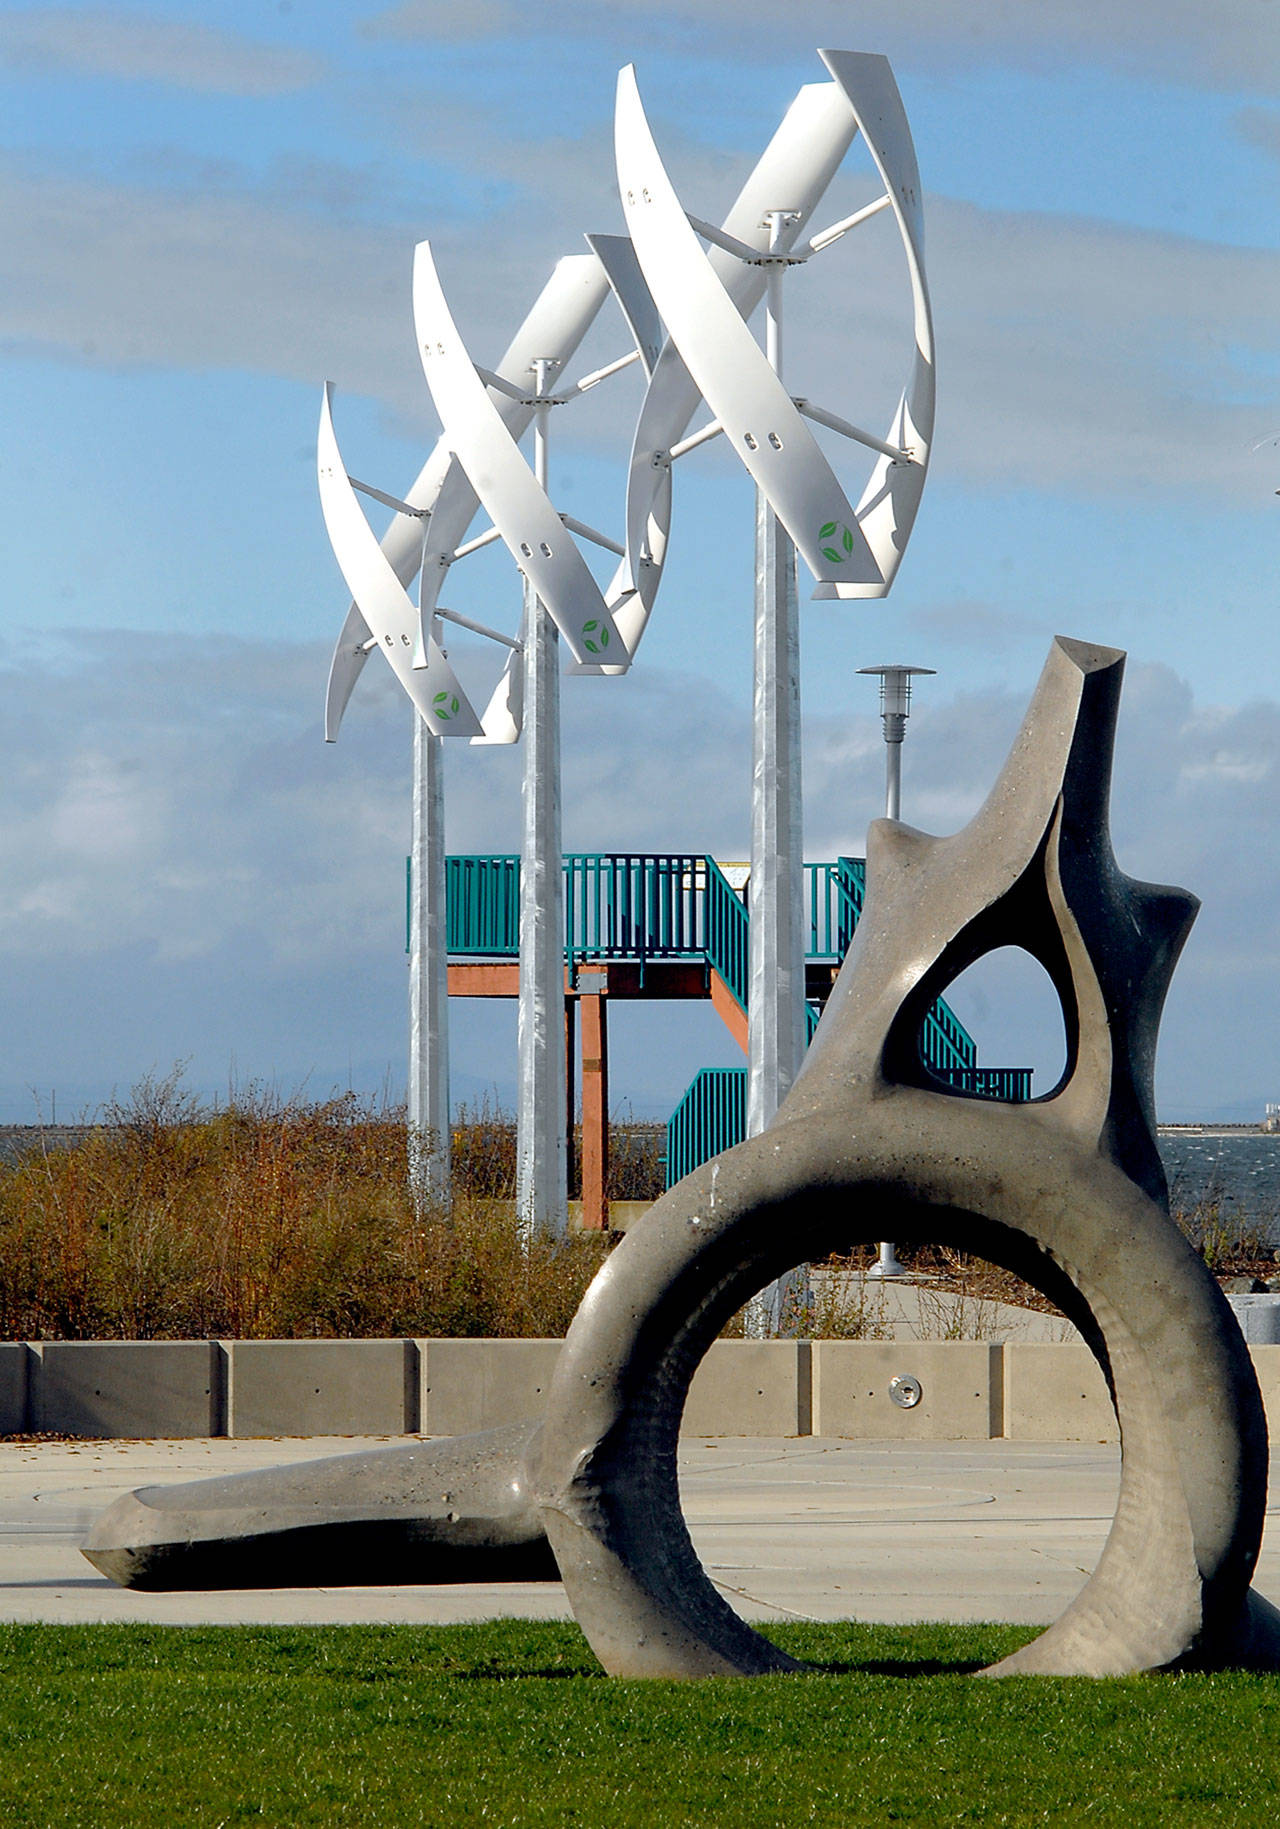 Three “wind spires” spin in the breeze next to the whalebone sculpture in West End Park along the Port Angeles waterfront Wednesday. (Keith Thorpe/Peninsula Daily News)